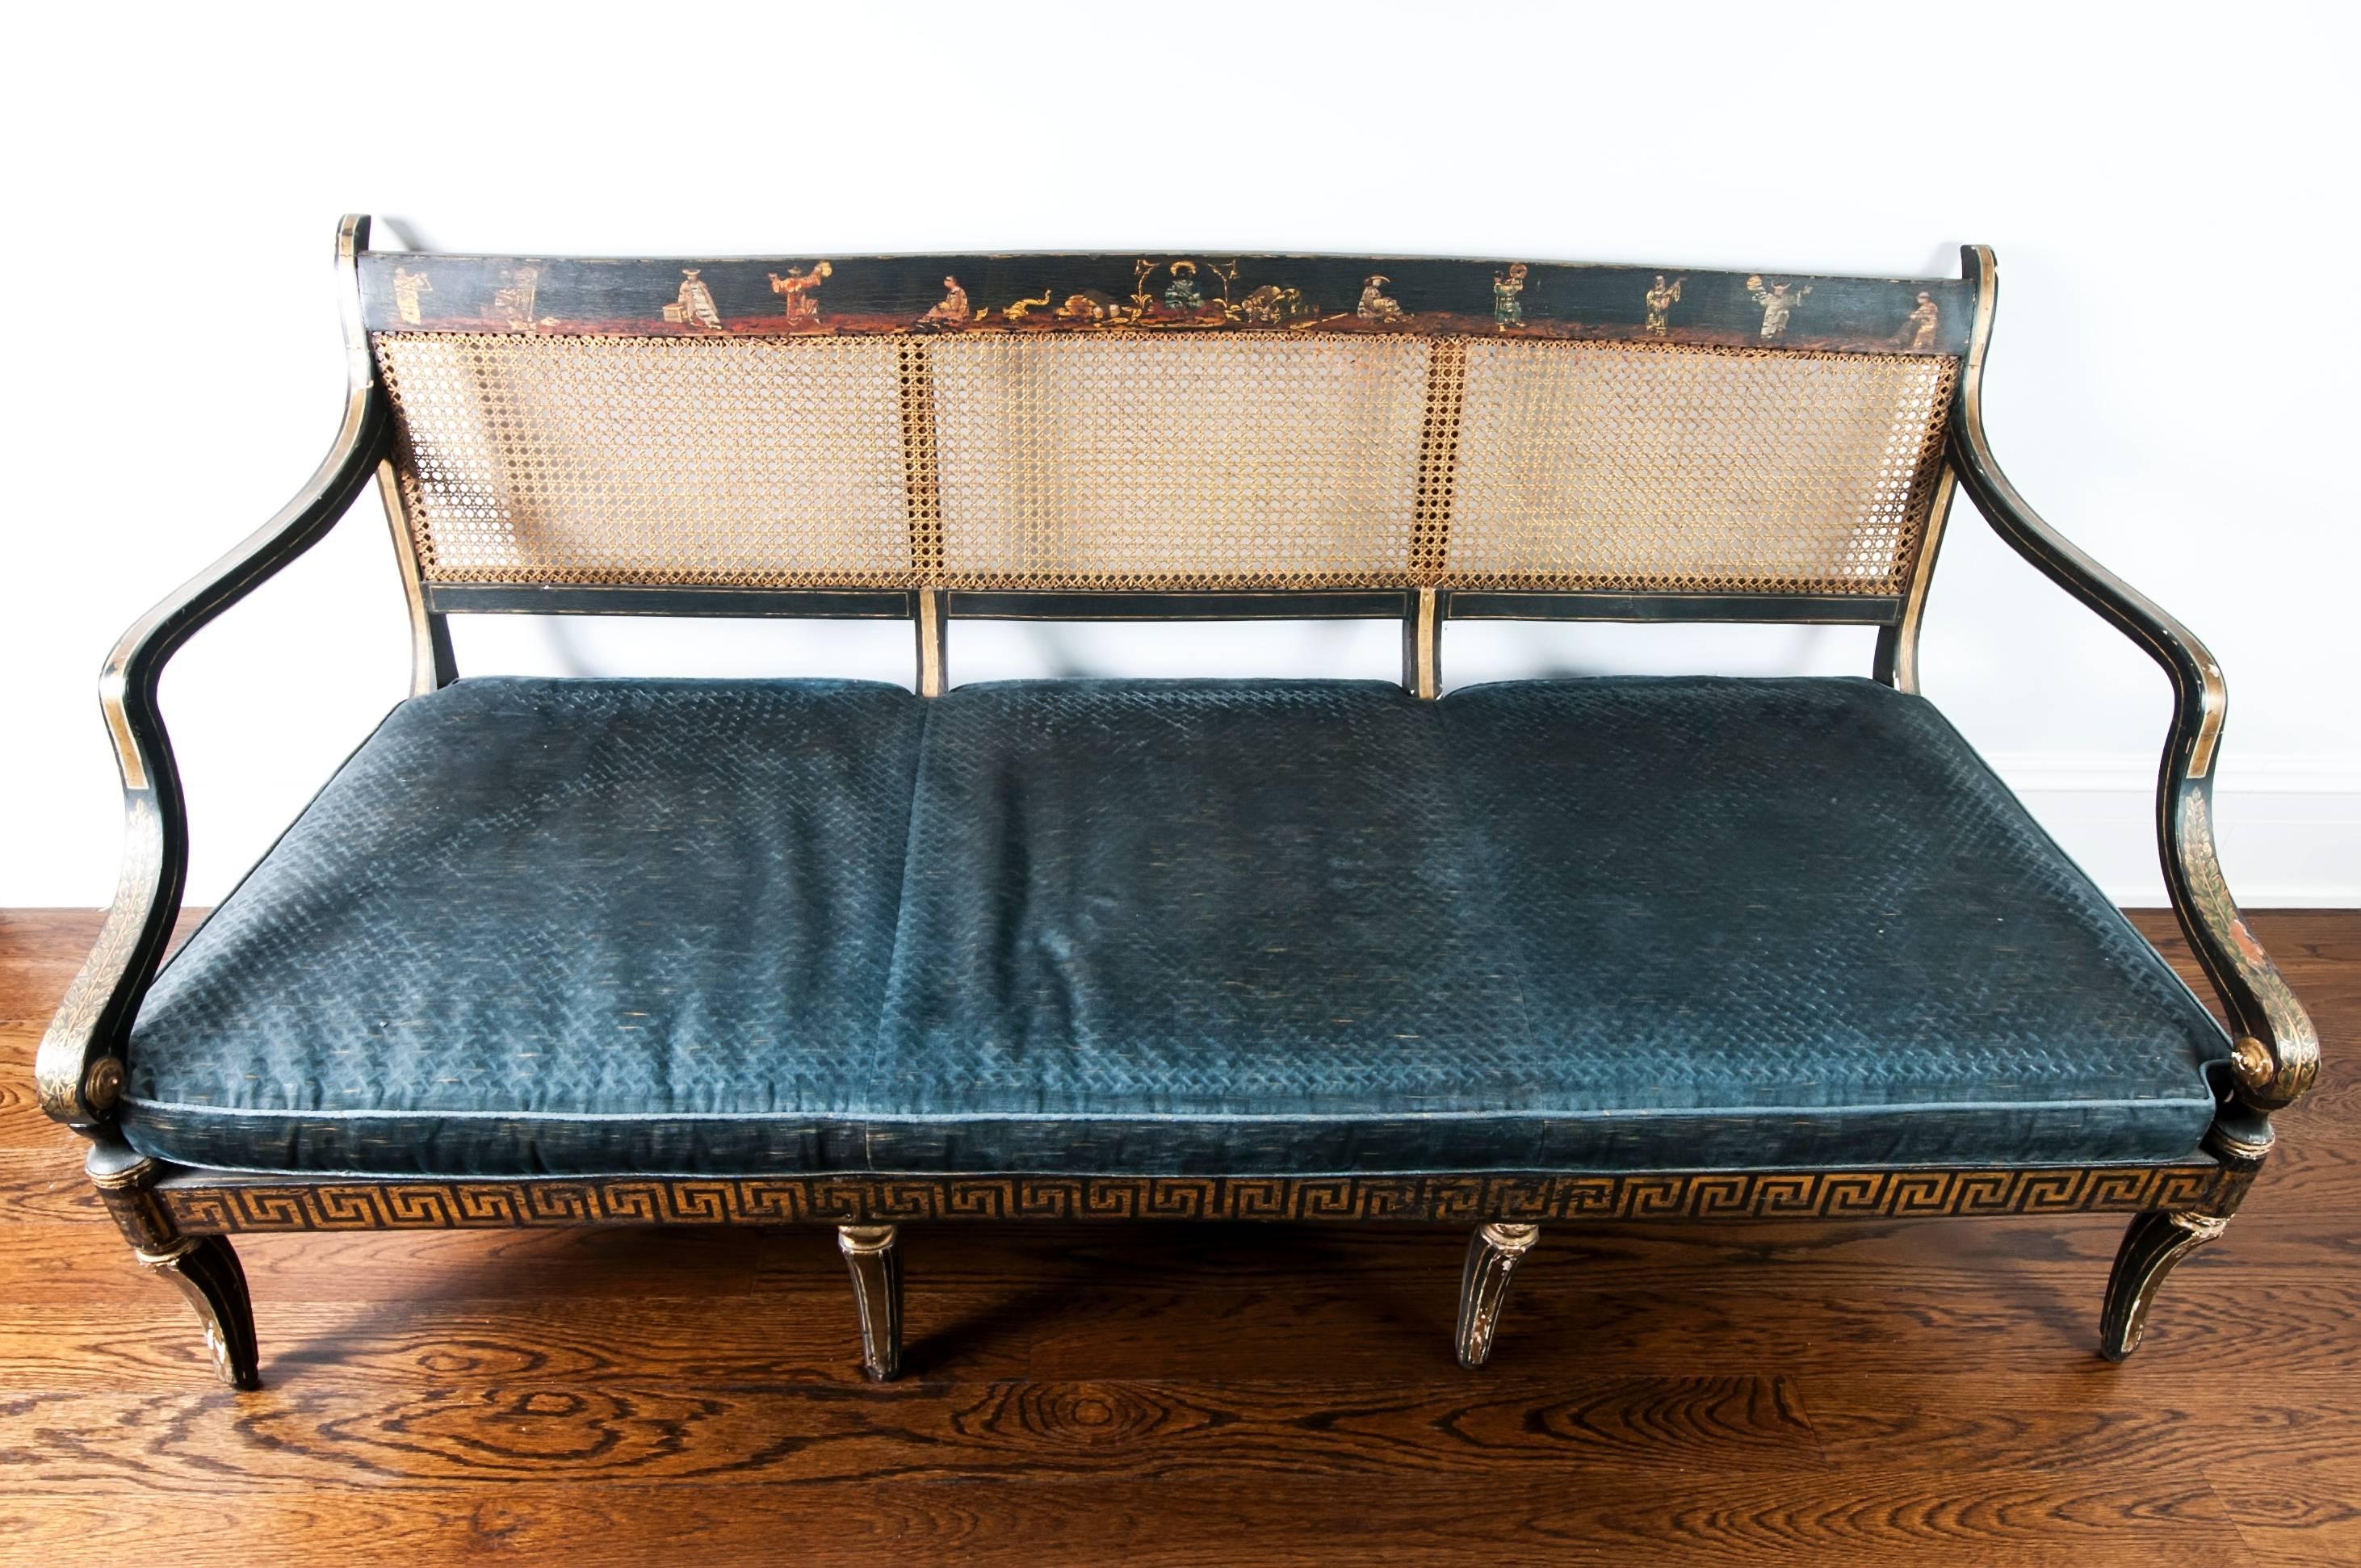 An antique painted Regency caned settee with velvet cushion. Frame is painted black with gilt accents and with chinoiserie imagery, the back and seat are caned, with the caning fully intact. The velvet cushion is original and shows overall wear. 